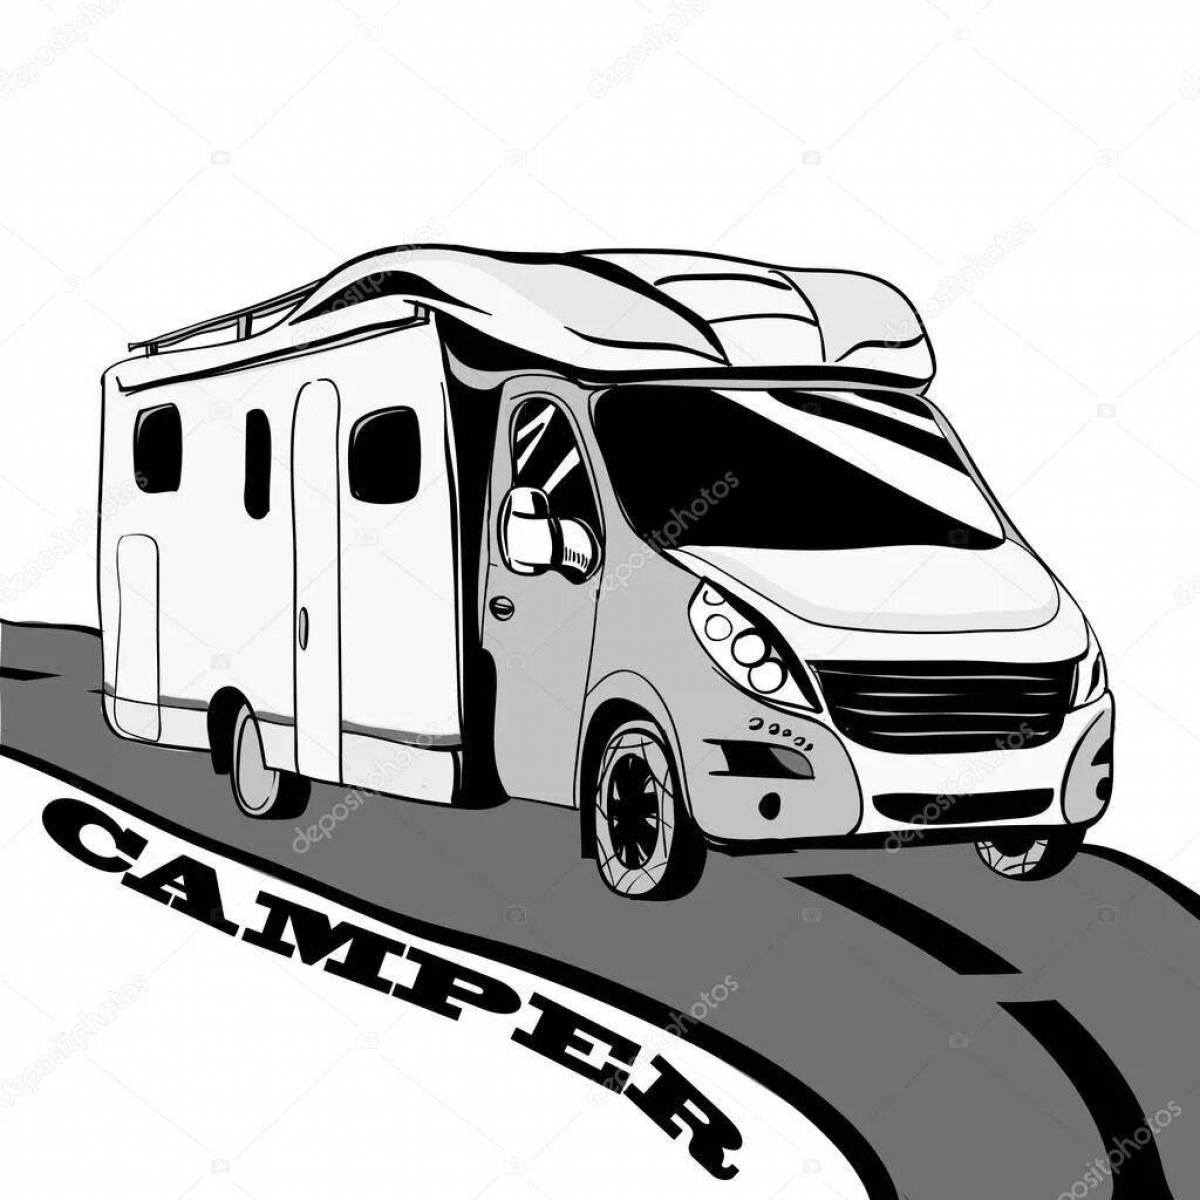 Outstanding motorhome coloring page